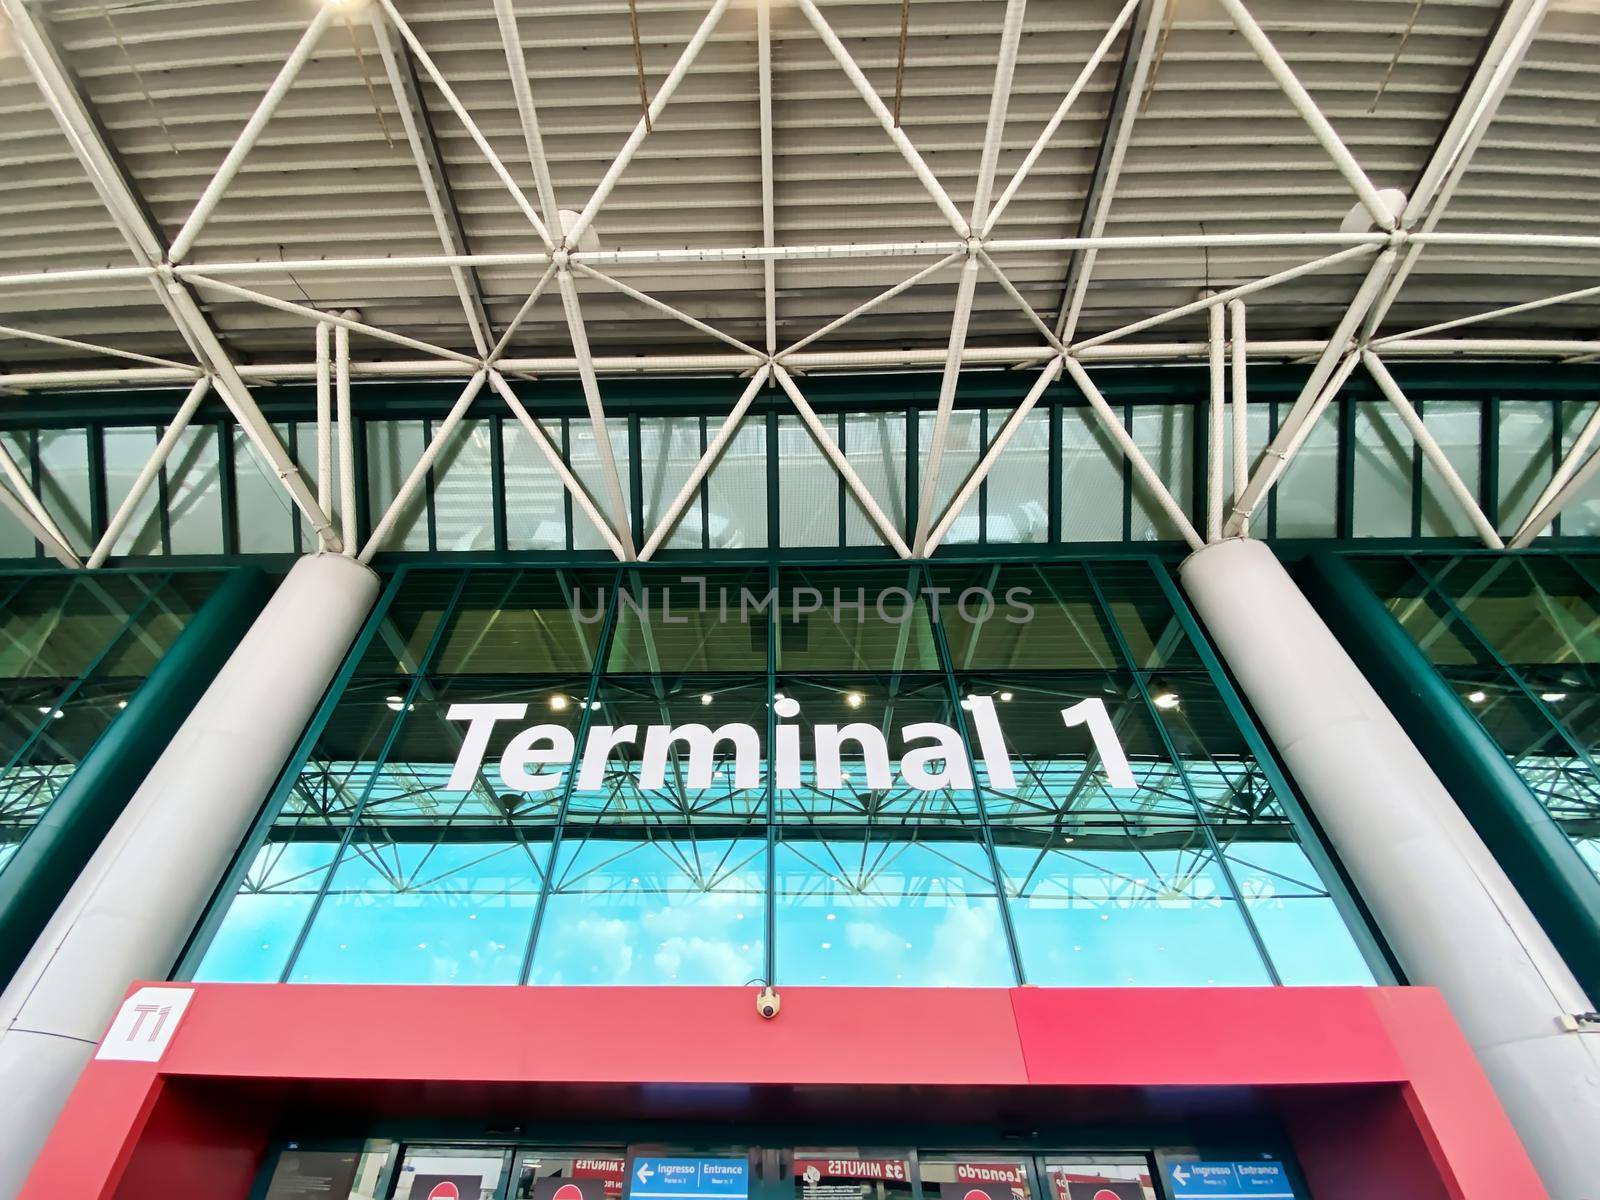 Rome, Italy, August 2021: The main entrance to Terminal 1 for departures at the Leonardo Da Vinci international airport in Fiumicino, Rome, Italy. by rarrarorro